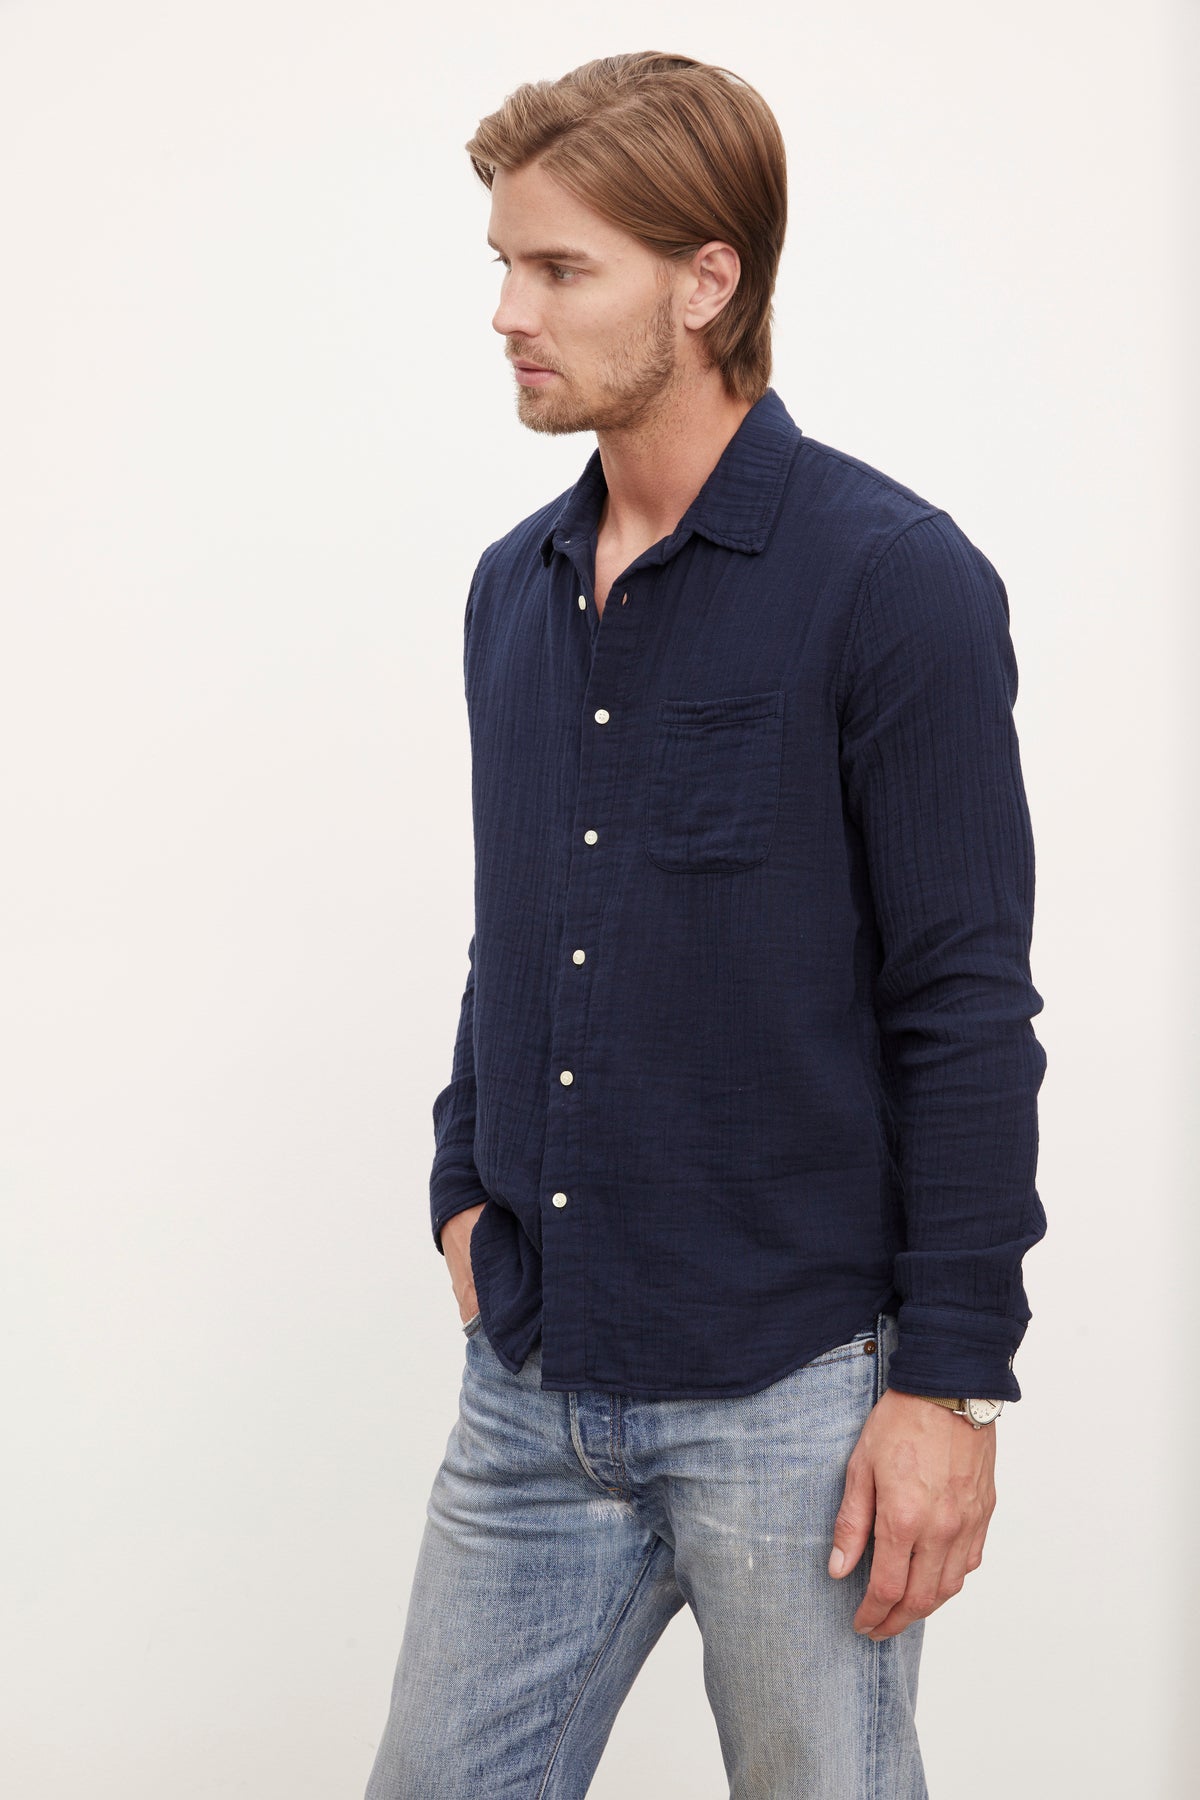   A man standing in a profile view, wearing a dark blue Velvet by Graham & Spencer ELTON COTTON GAUZE button-up shirt and light blue jeans, looking to the side against a plain background. 